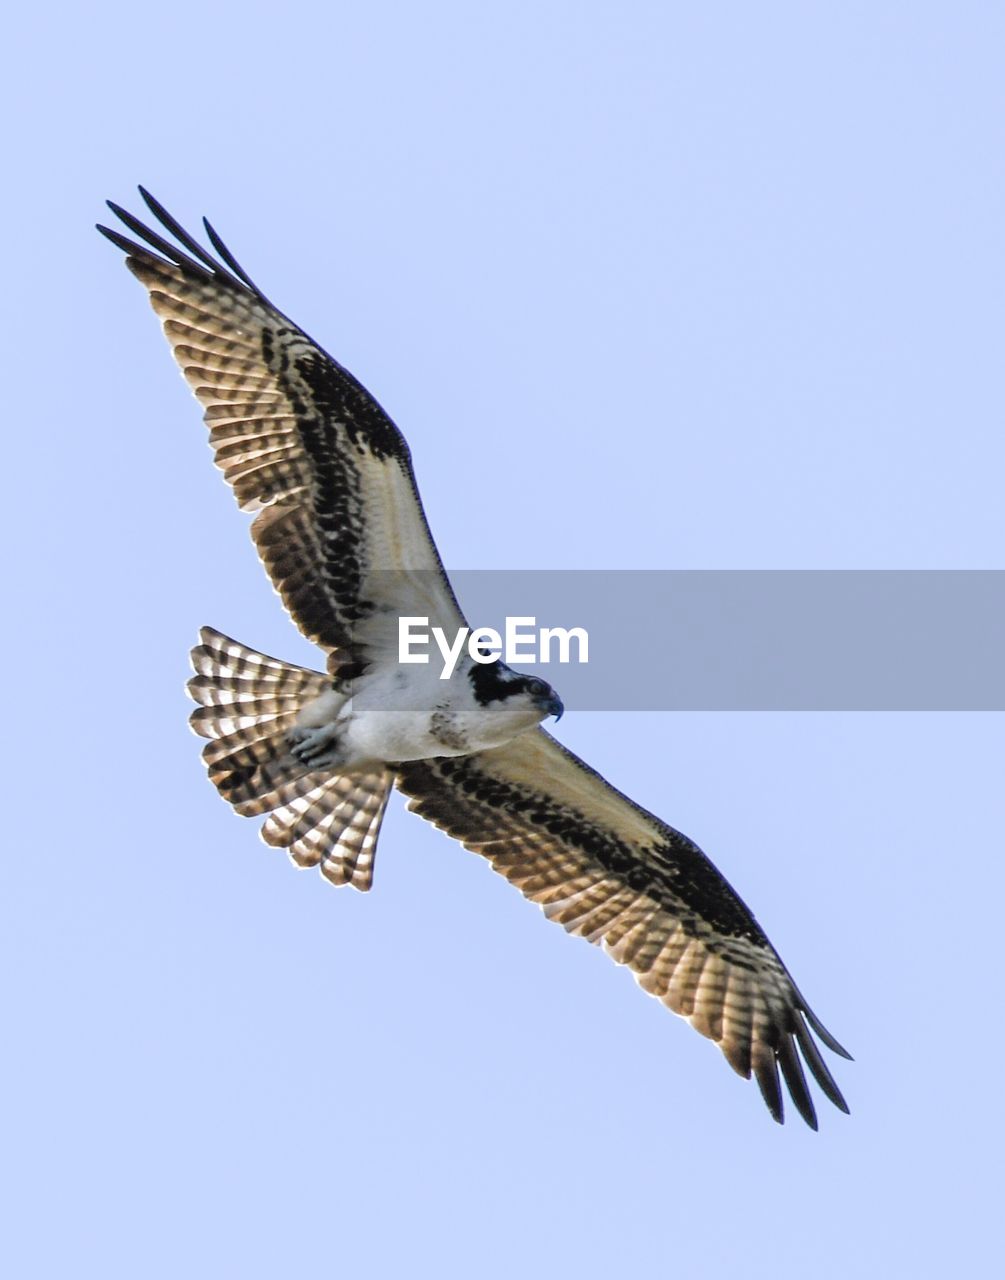 LOW ANGLE VIEW OF EAGLE FLYING IN SKY